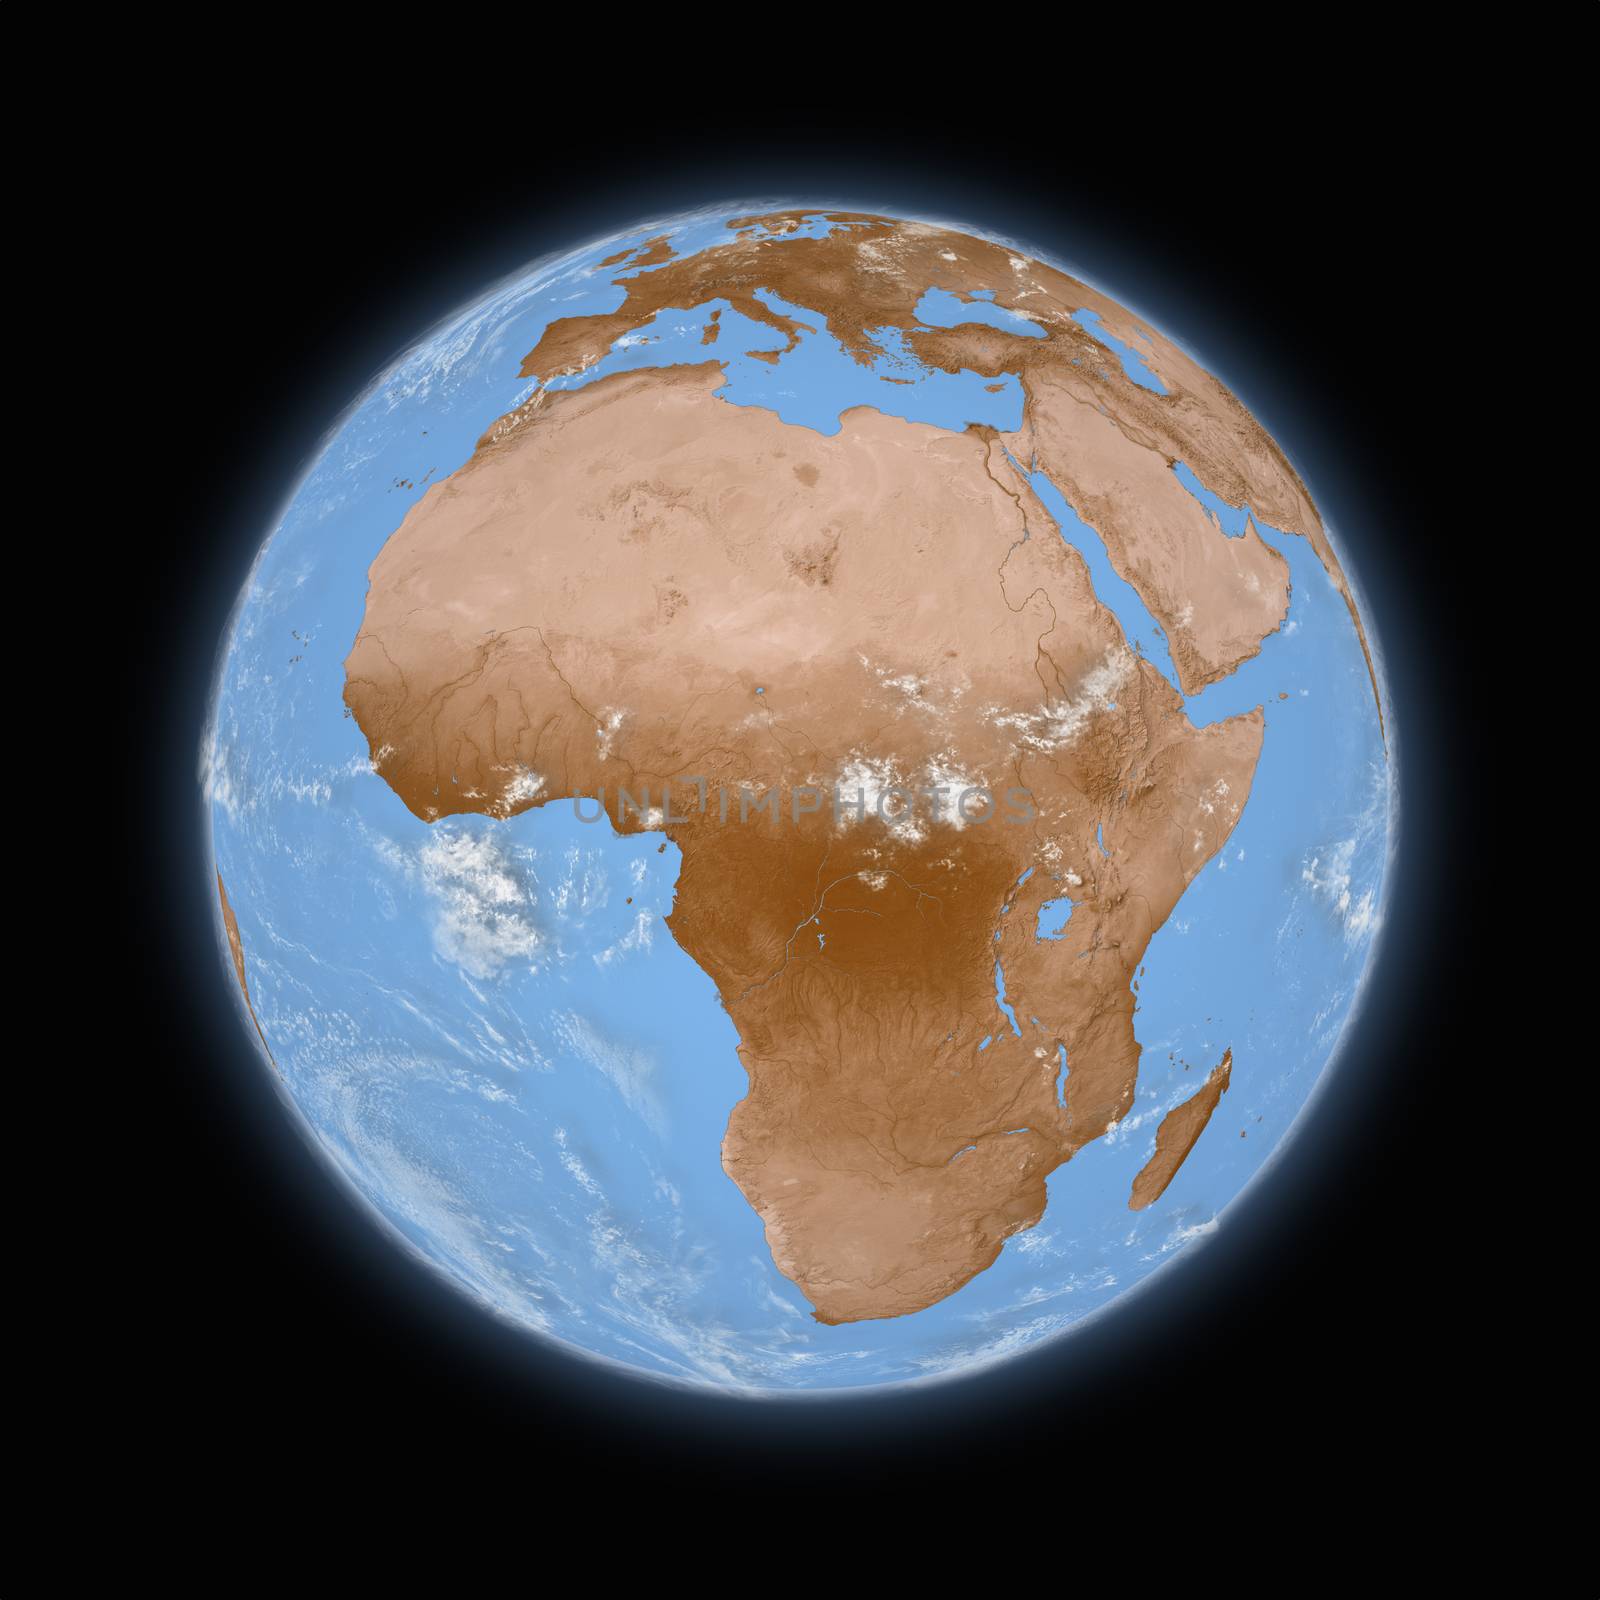 Africa on blue planet Earth isolated on black background. Highly detailed planet surface. Elements of this image furnished by NASA.